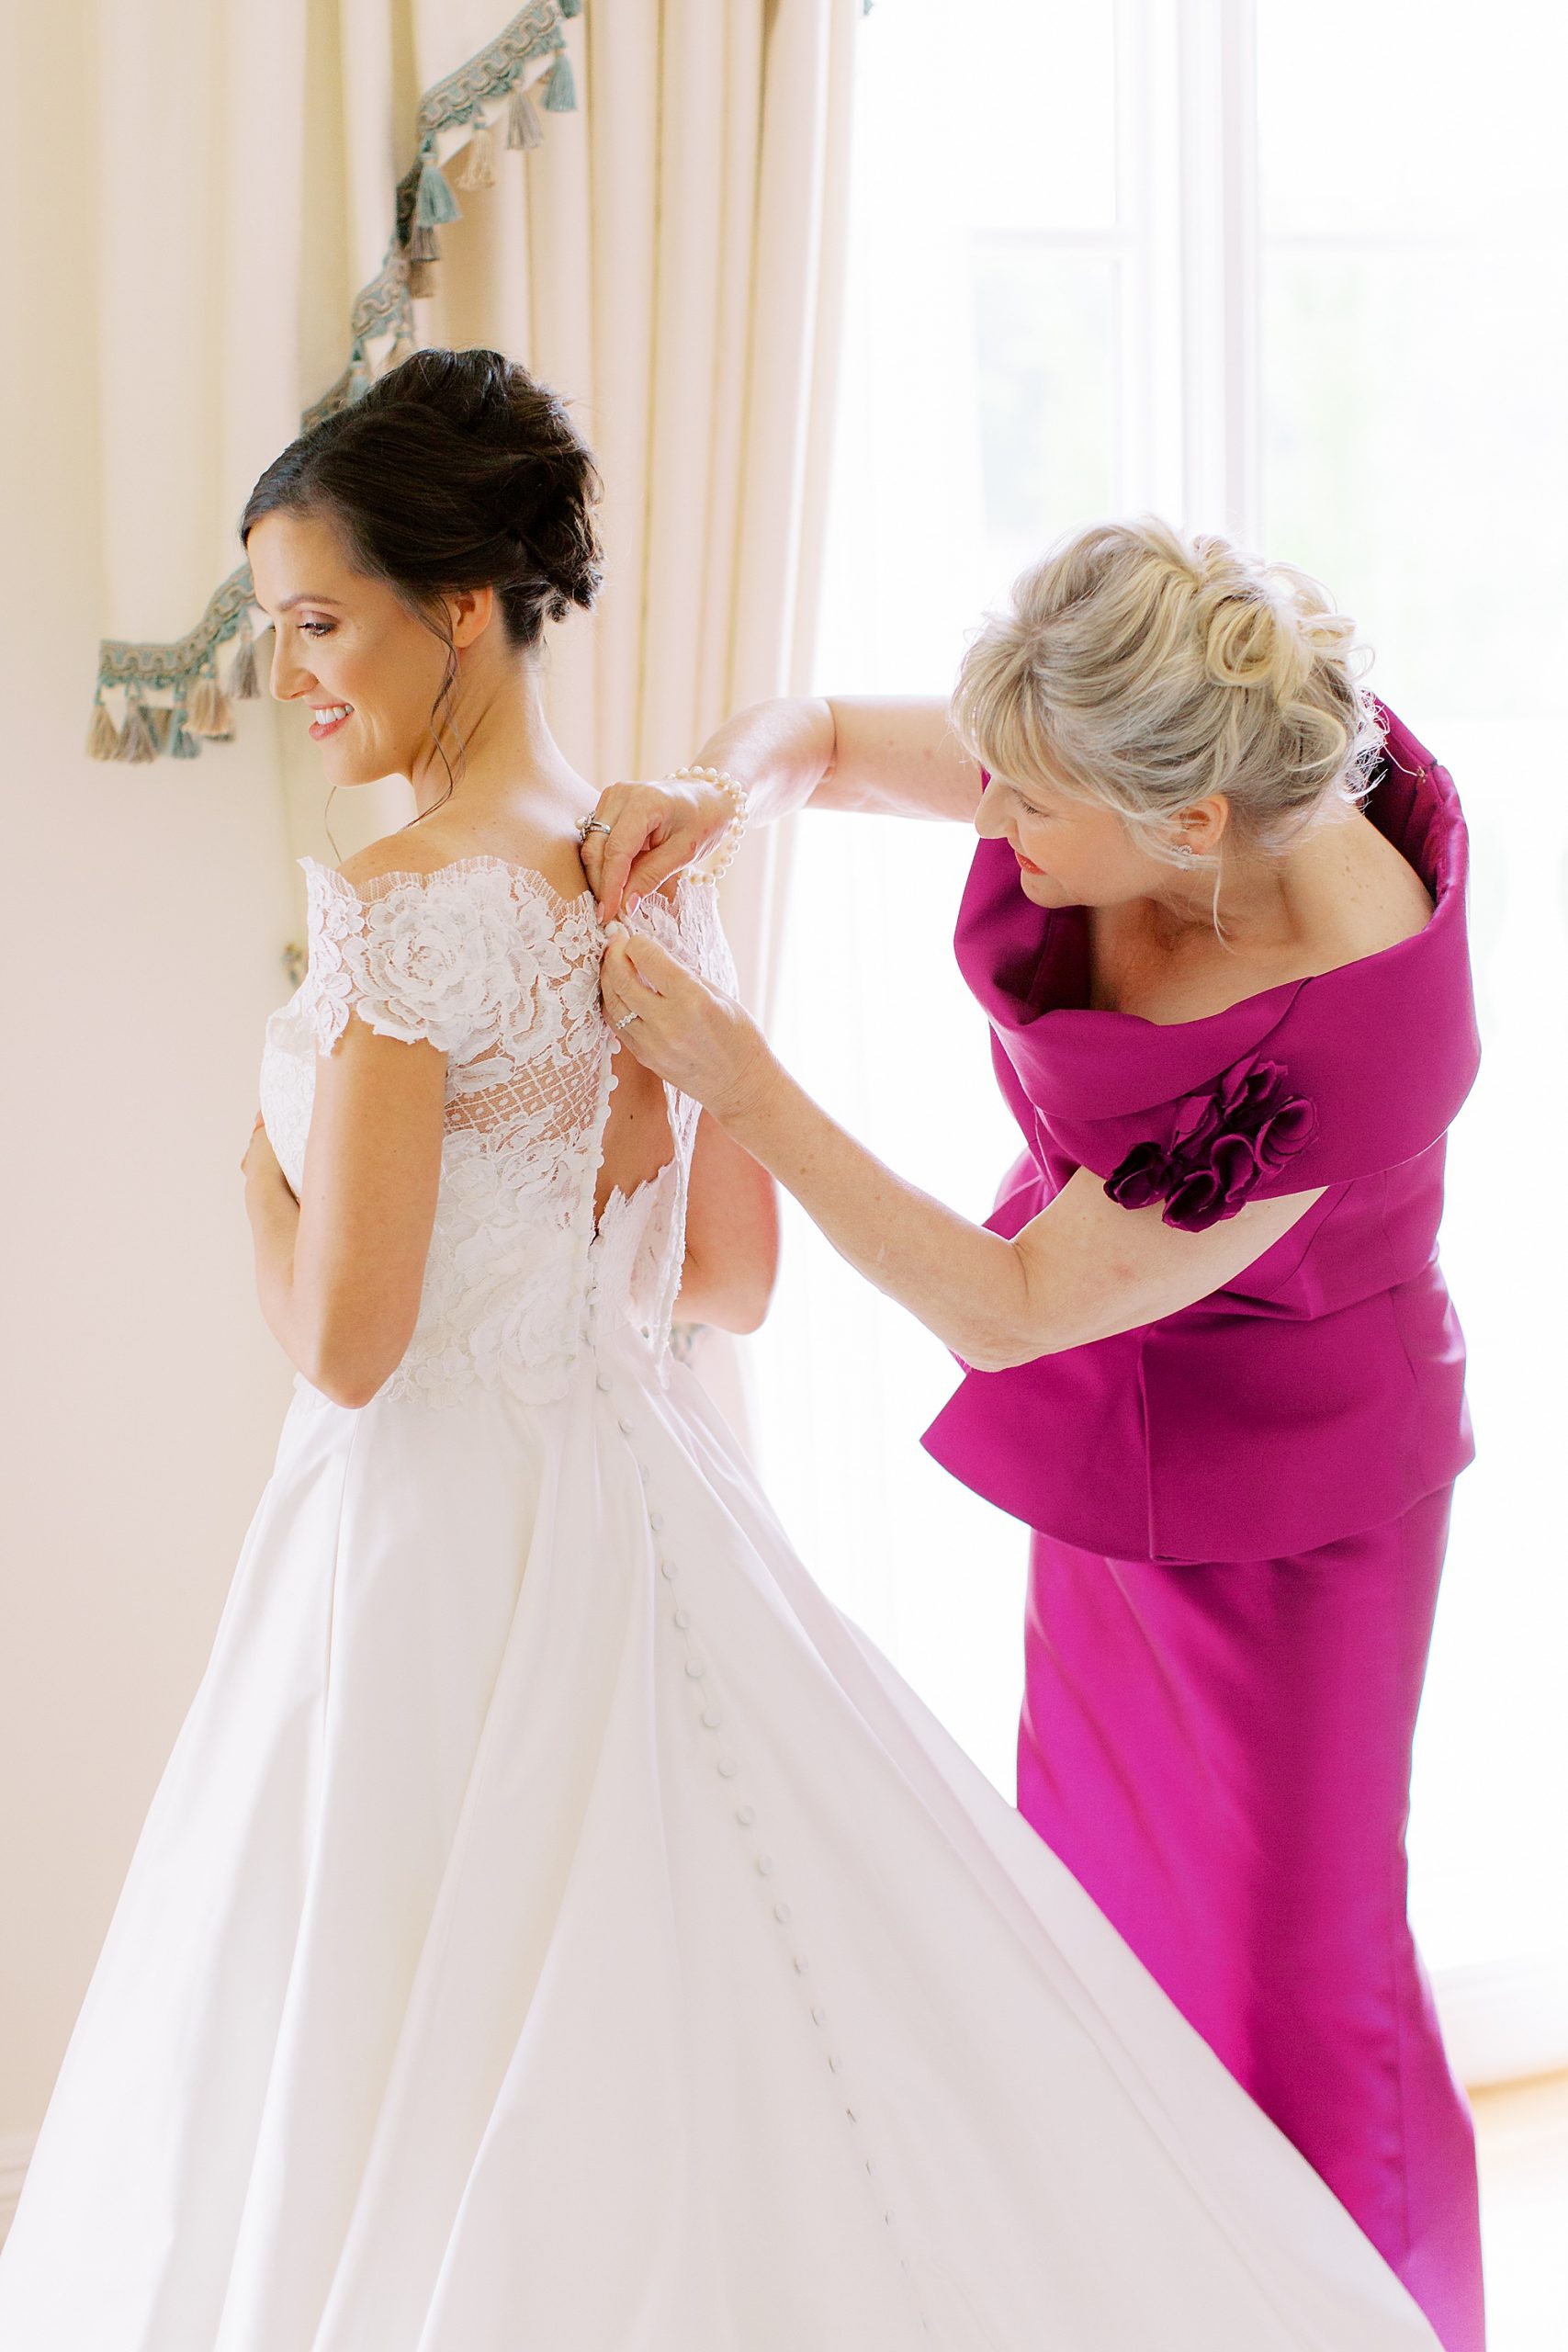 mother of the bride helps bride with wedding gown